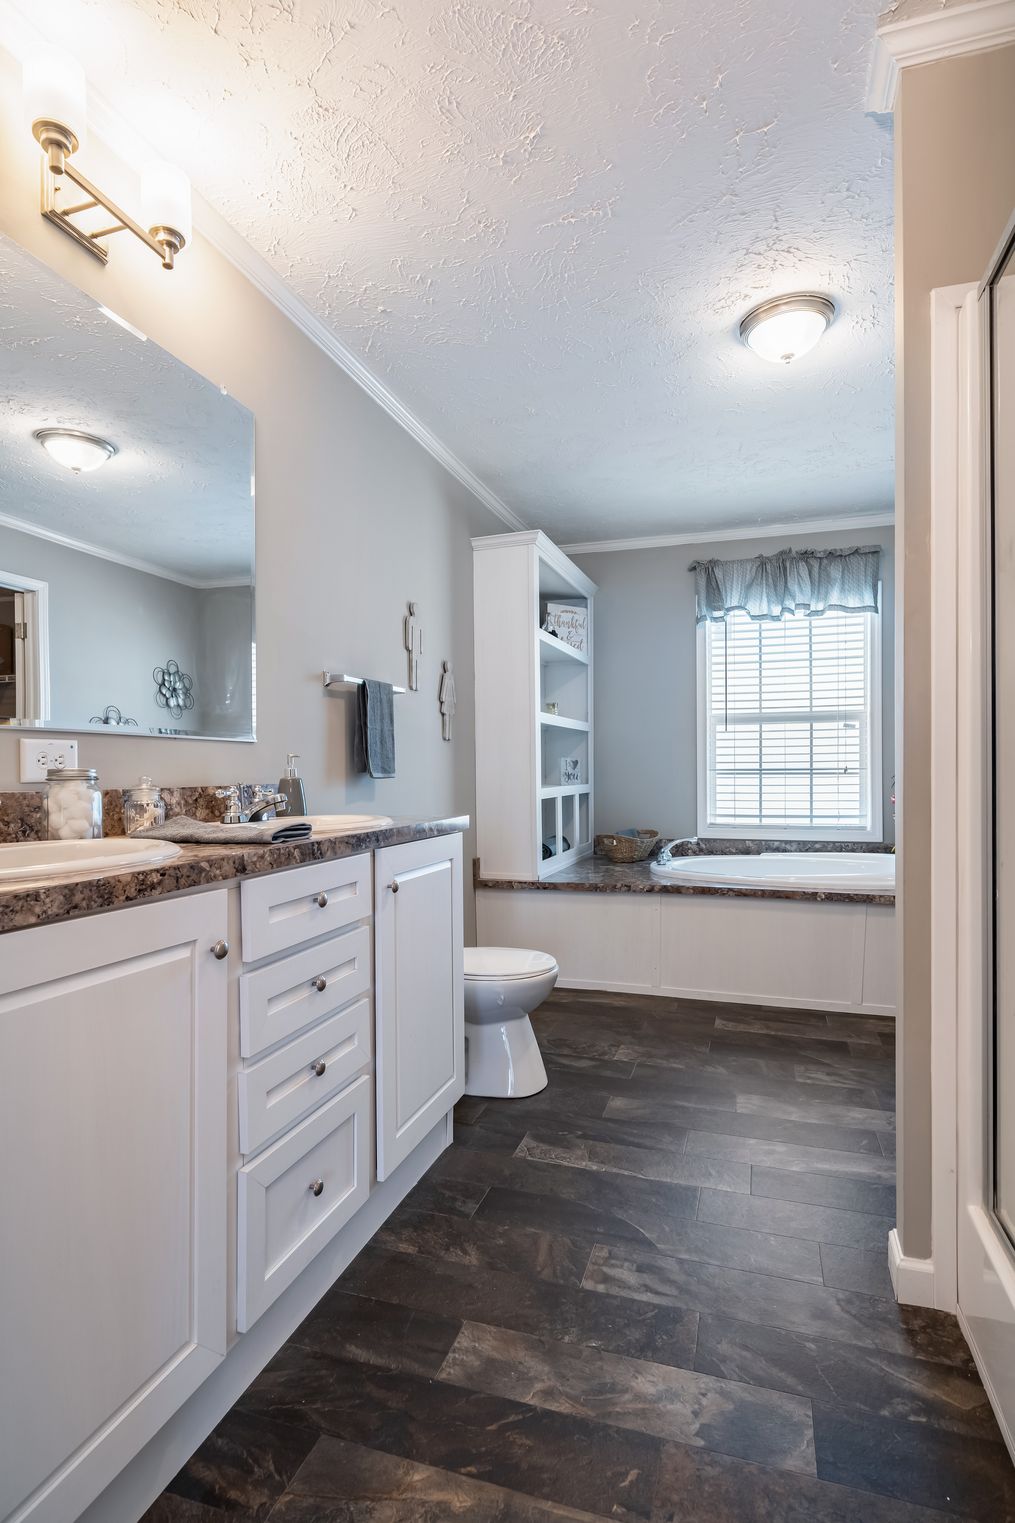 The 4607 ROCKETEER 7 7628 Master Bathroom. This Manufactured Mobile Home features 4 bedrooms and 2 baths.